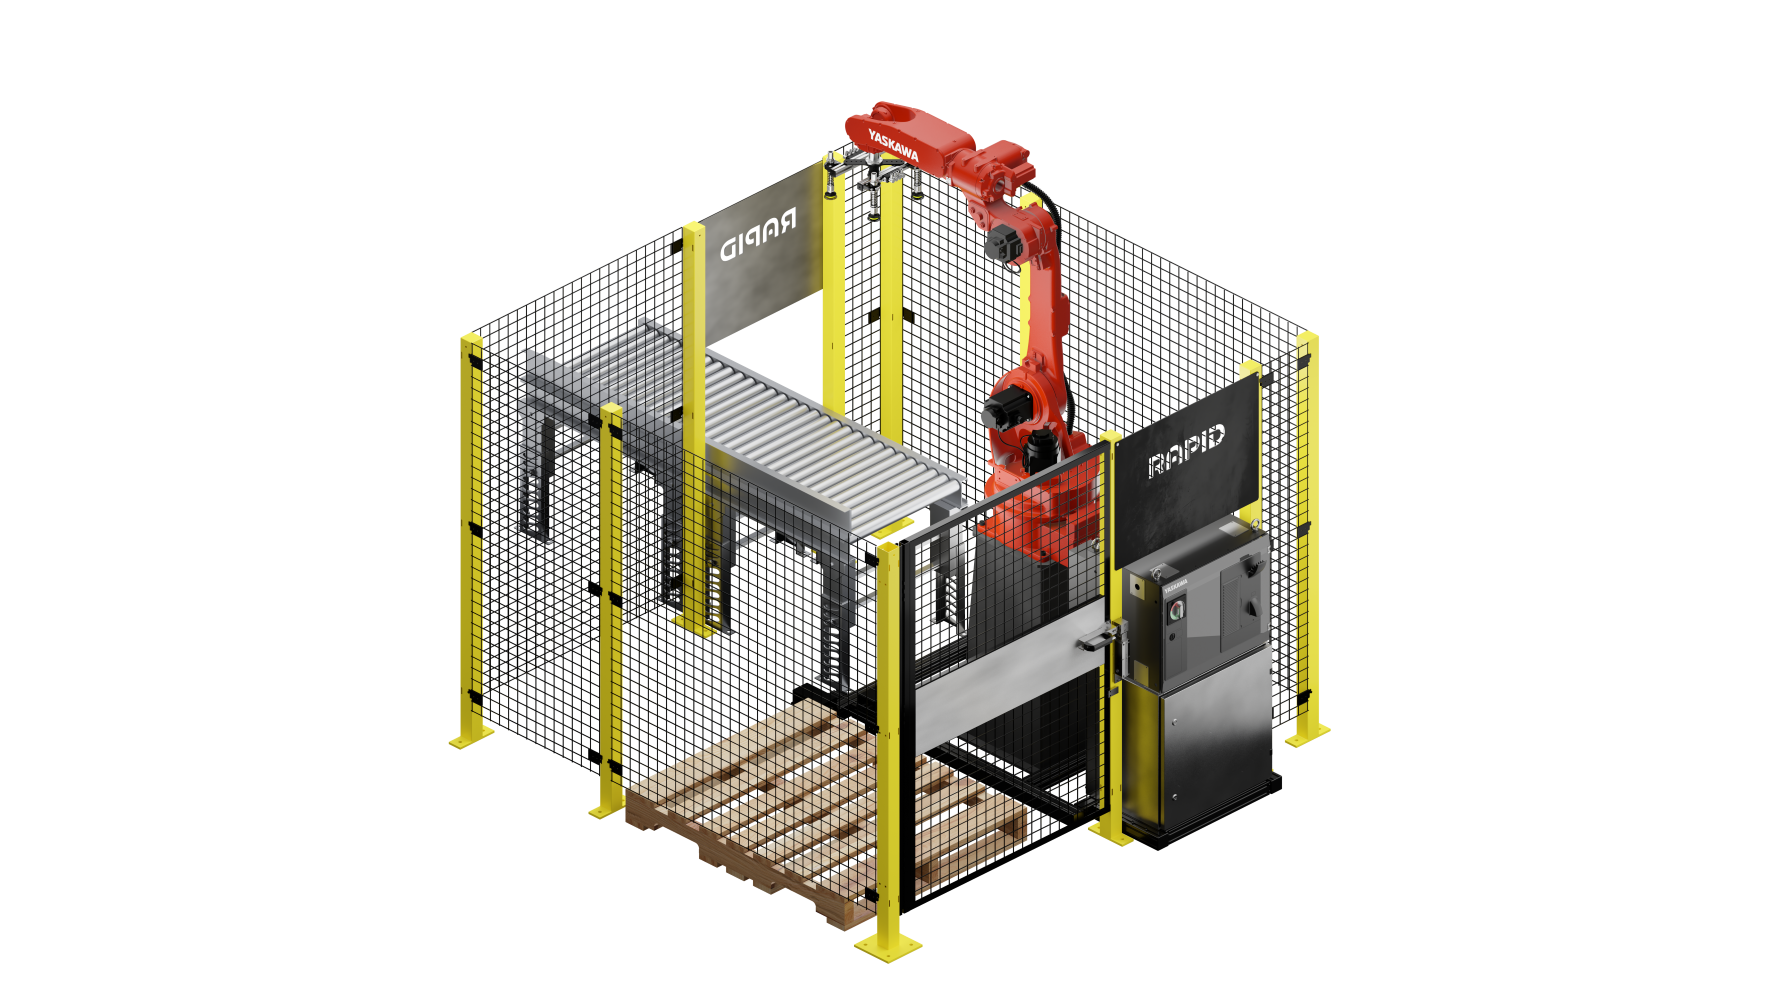 A rear view of a red industrial robot arm in a fenced workcell. The arm is ready to pick from an infeed belt in front of it, and place a box on a wooden pallet on the right side of the image.